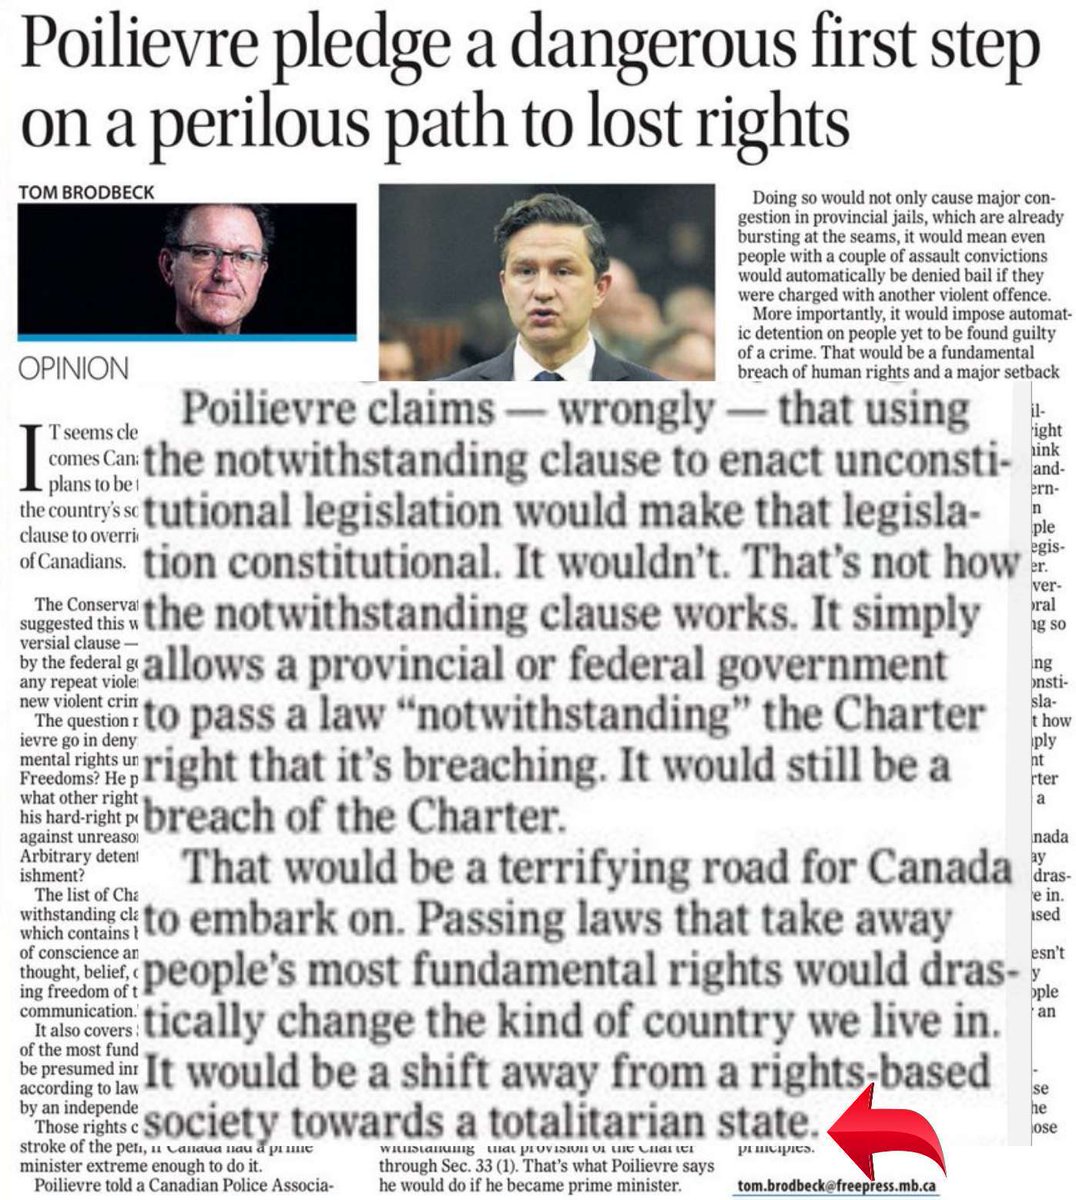 #cdnpoli
#NeverPoilievre
#PierrePoilievreisWacko
#PierrePoilievreIsMAGA
#PierreDoesntCare
#PierrePoilievreIsLyingToYou

There is not a shred of doubt that #PierrePoilievre is a real threat to democracy, very real.